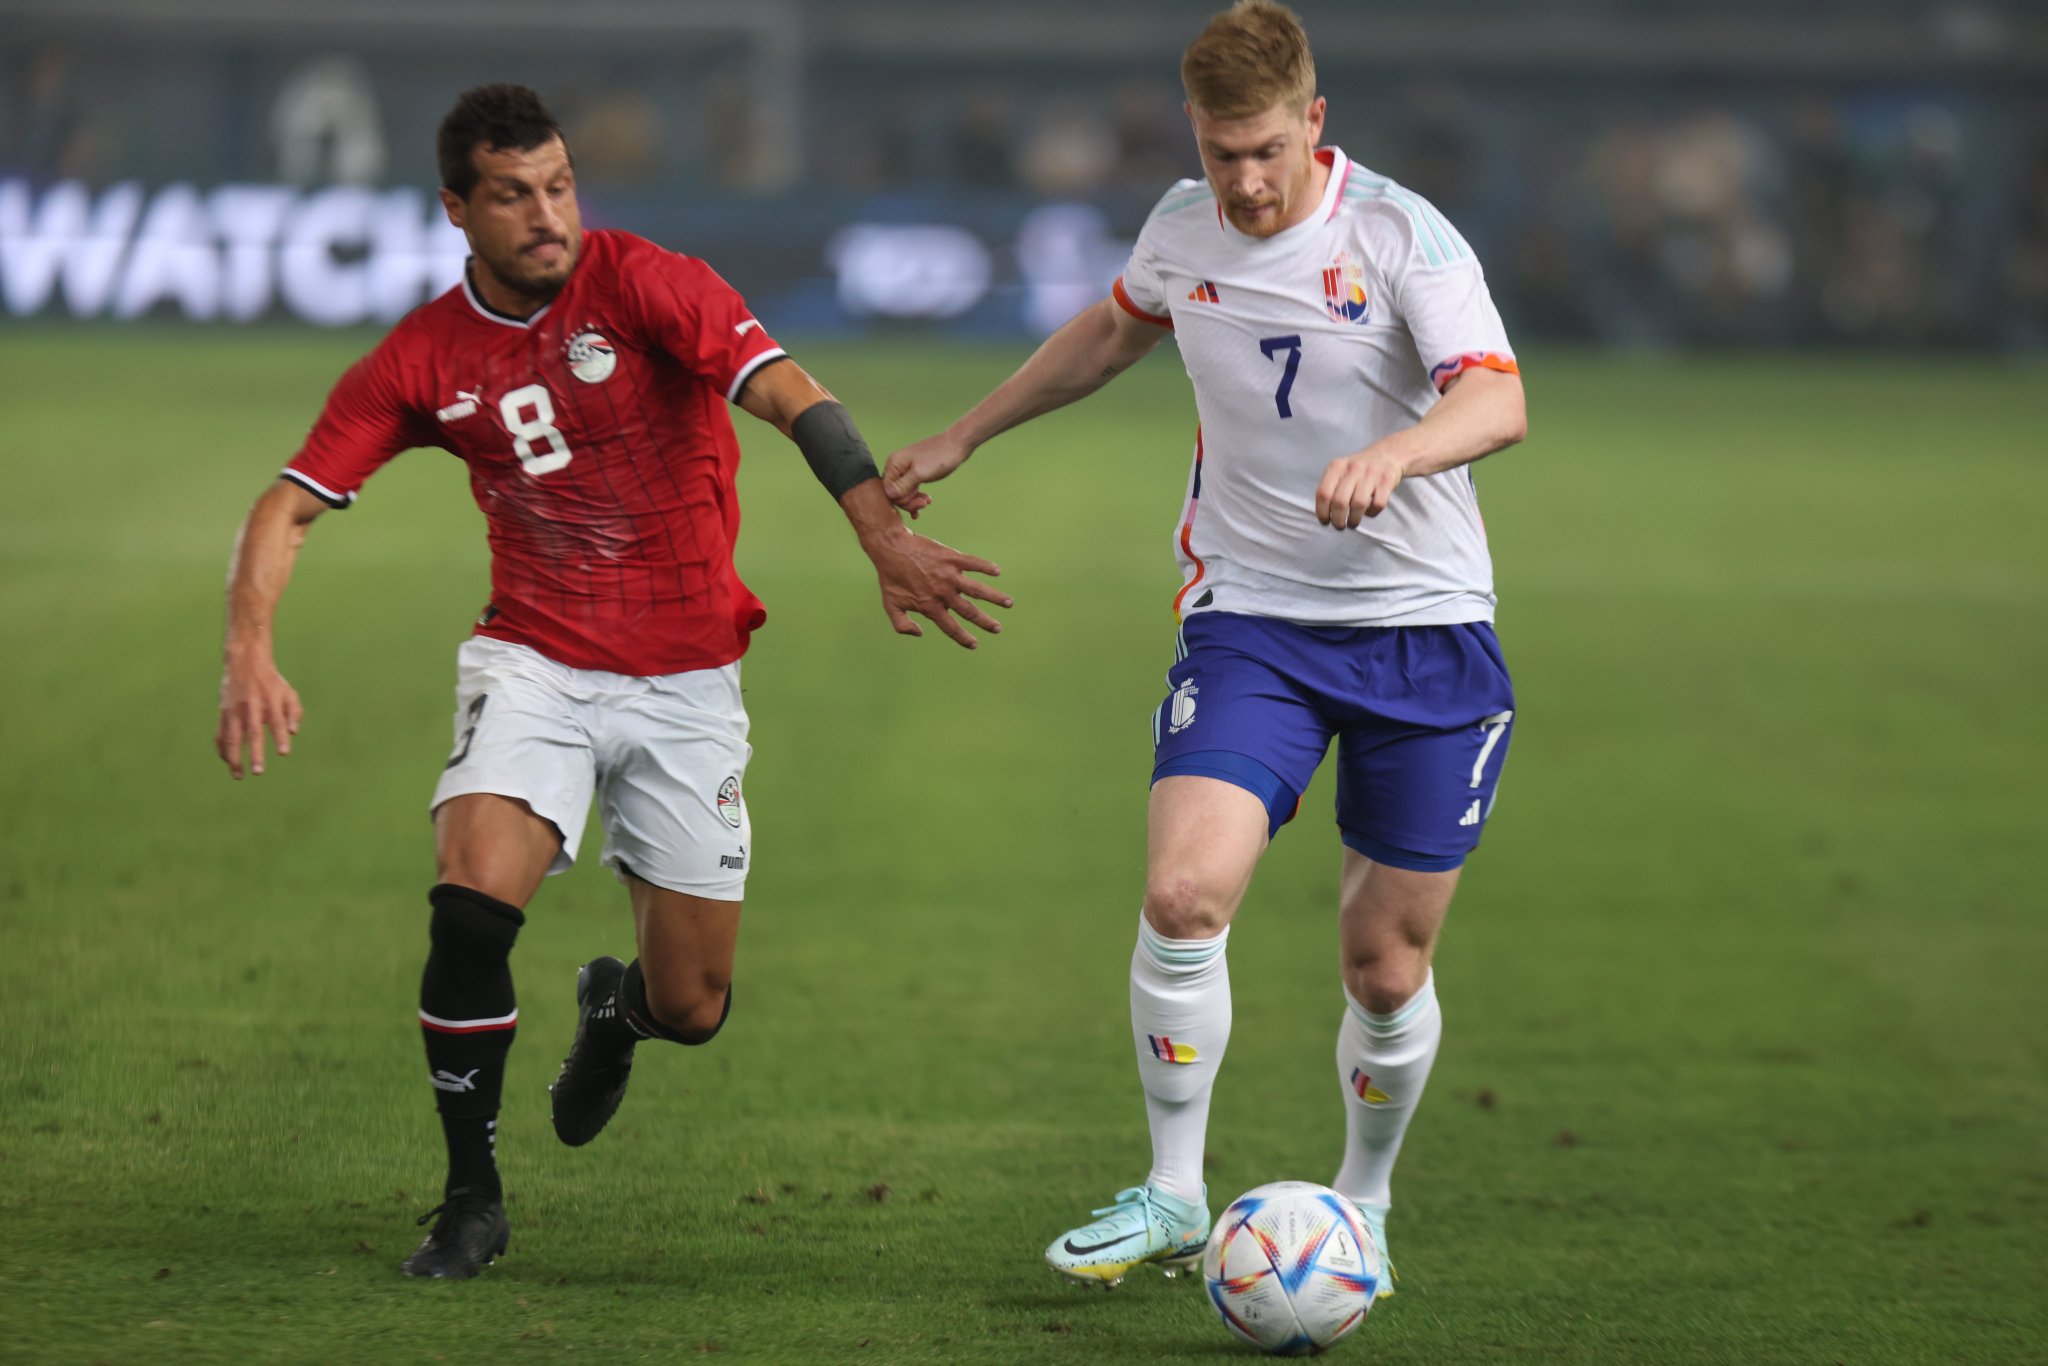 Belgium Loses (1-2) Against Egypt in Friendly Match